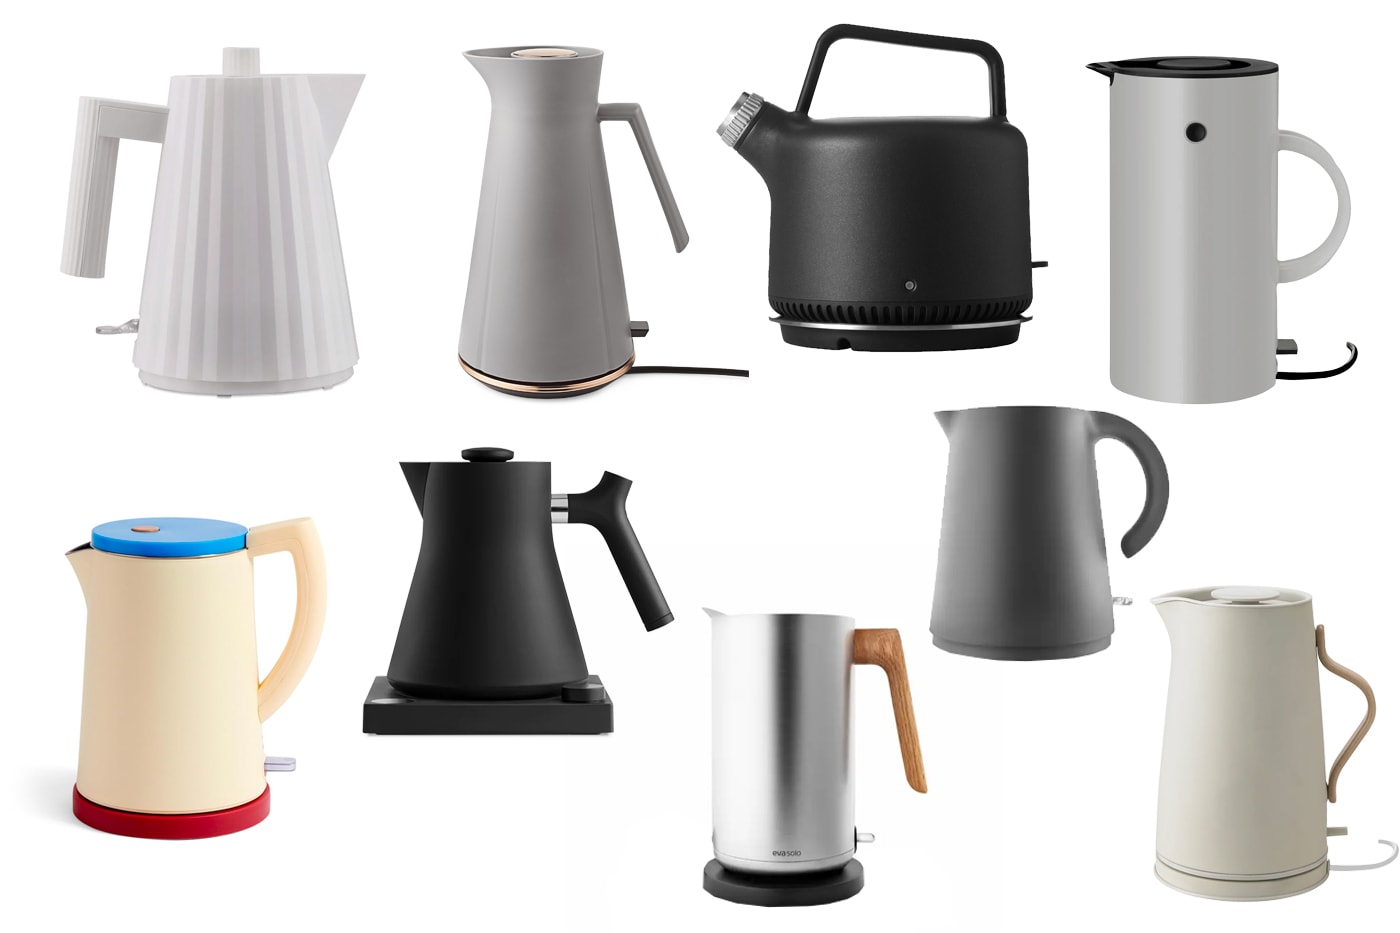 10 stylish electric kettles for the modern interior - COCO LAPINE